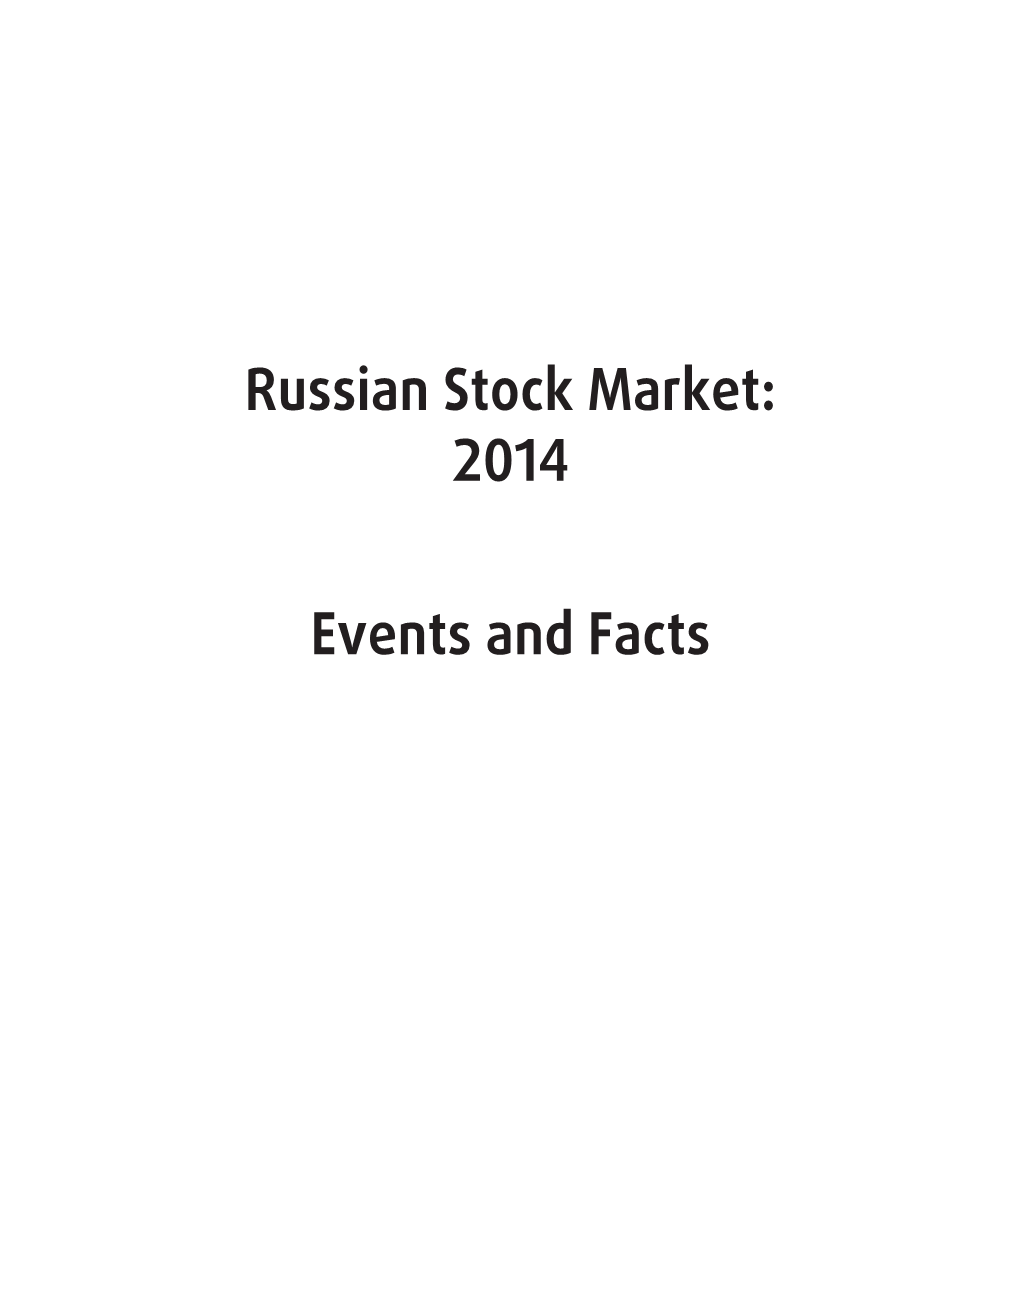 Russian Stock Market: 2014 Events and Facts